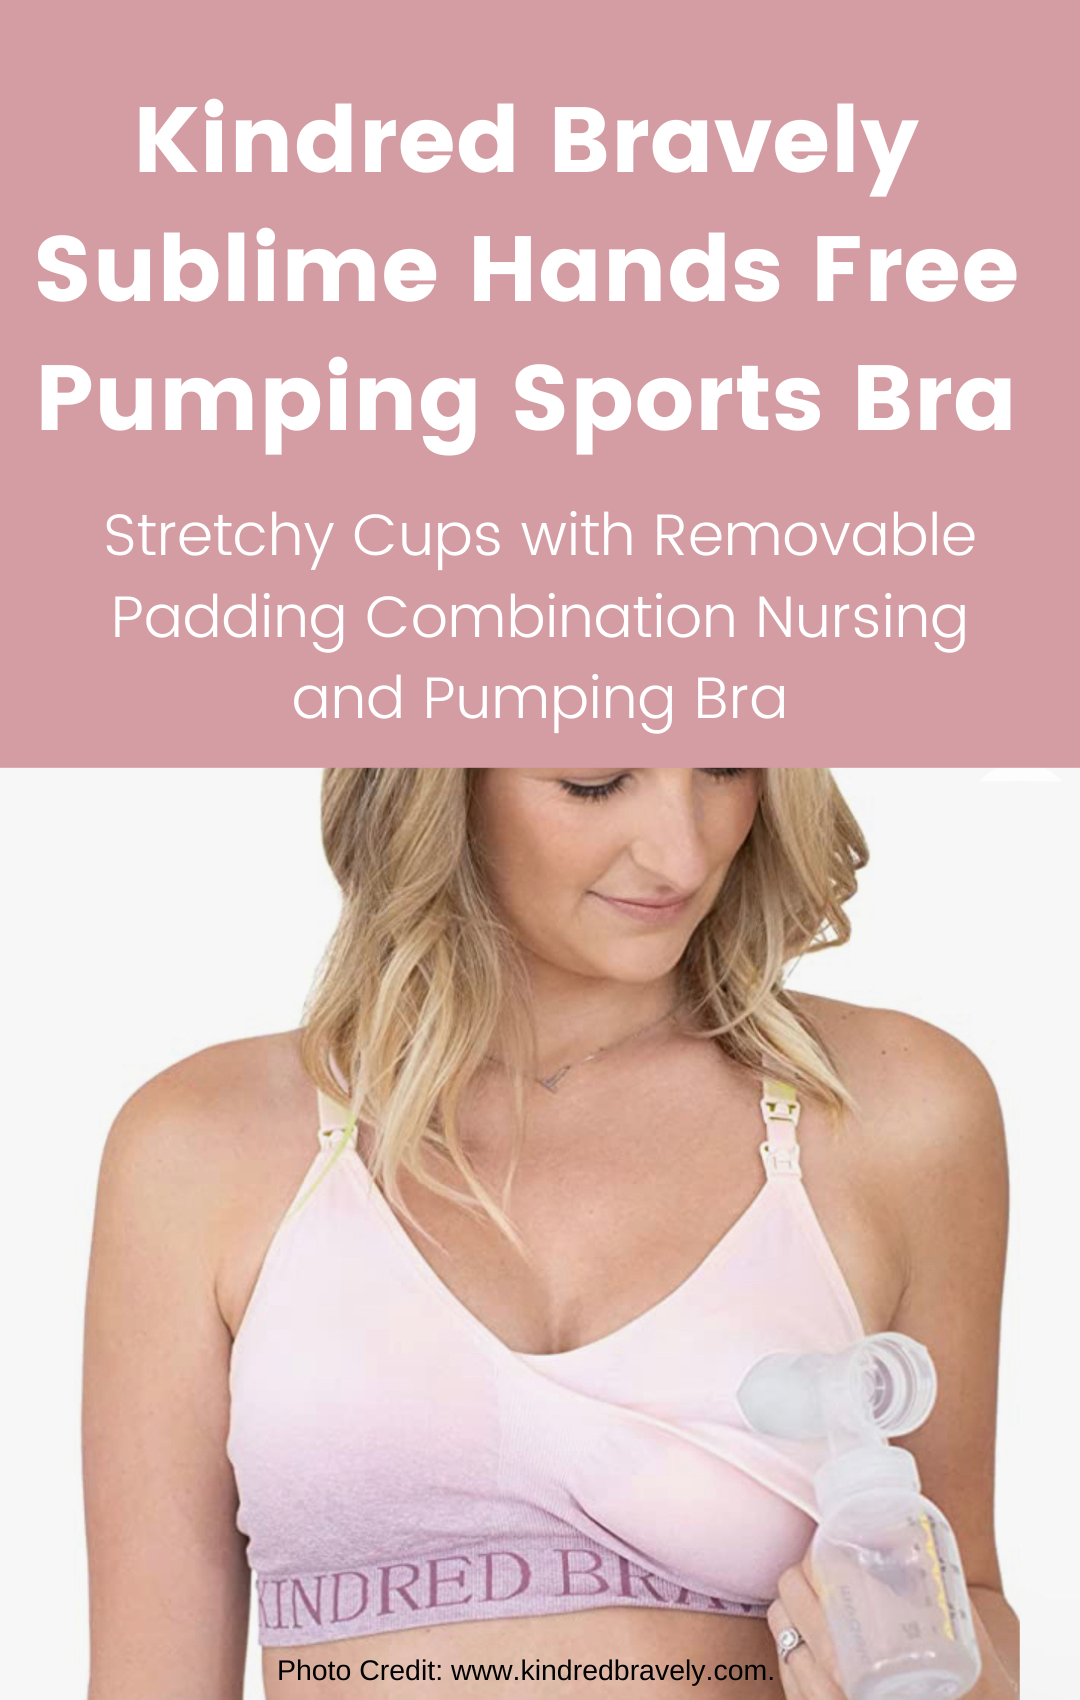 Momcozy Upgraded Hands Free Pumping Bra, Comfort Pumping and